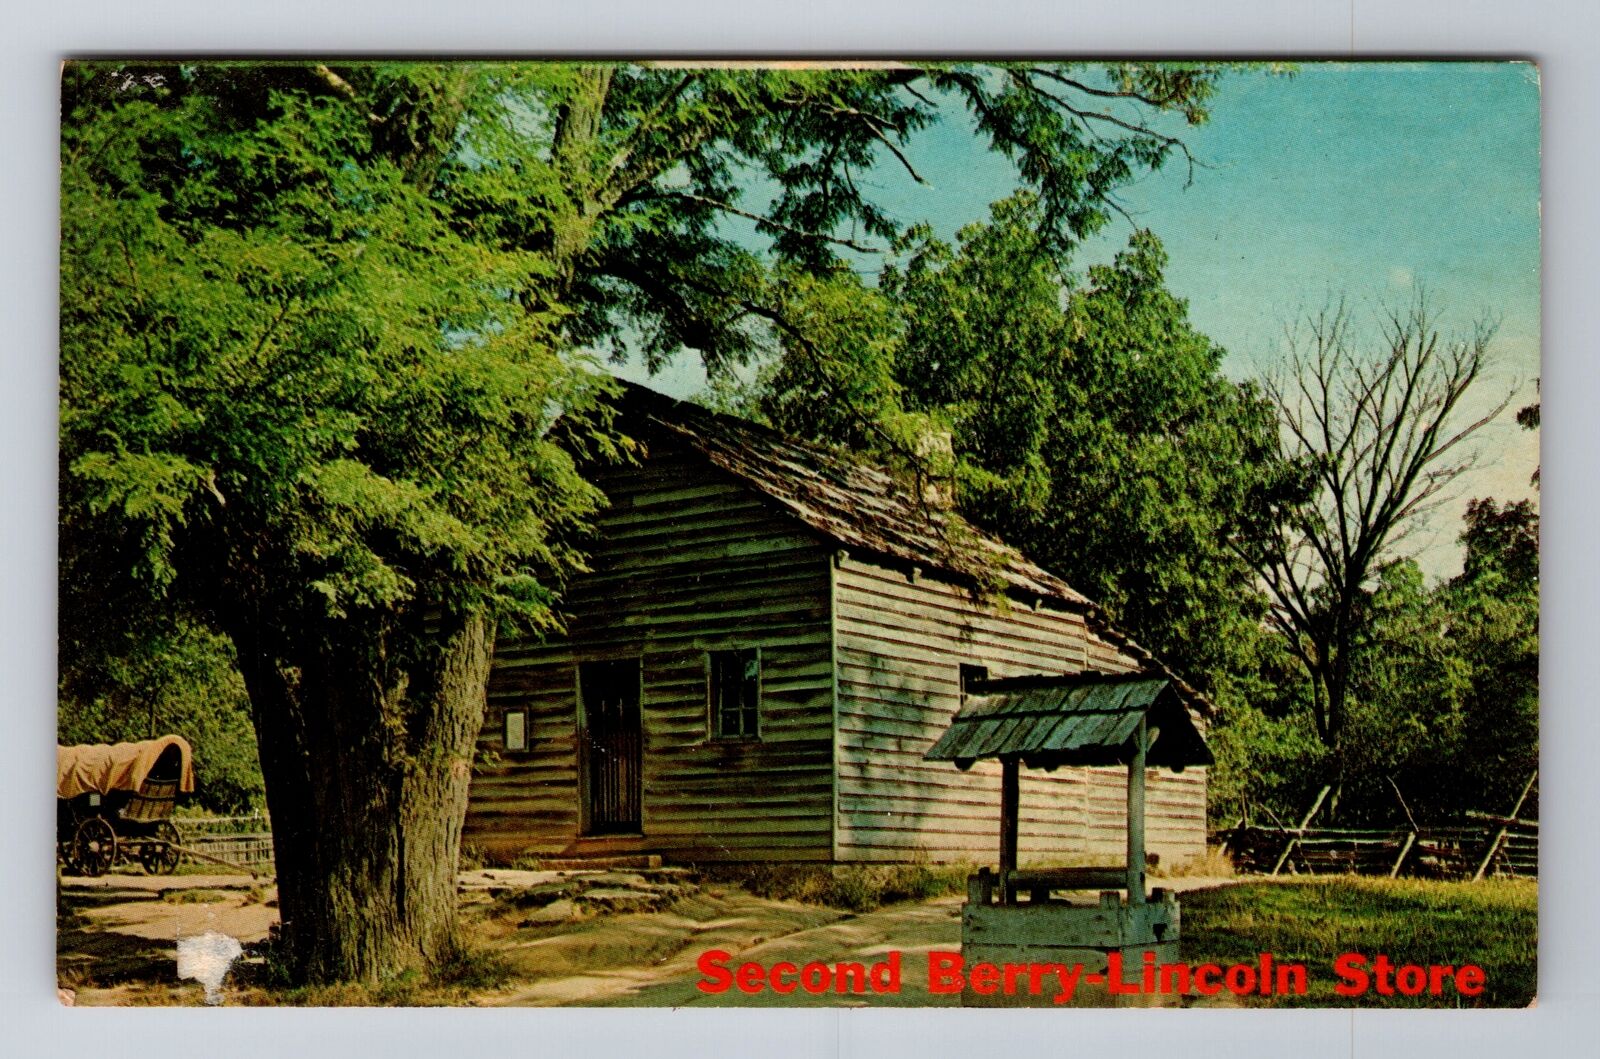 Lincoln's New Salem IL-Illinois, Second Berry-Lincoln Store, Vintage Postcard